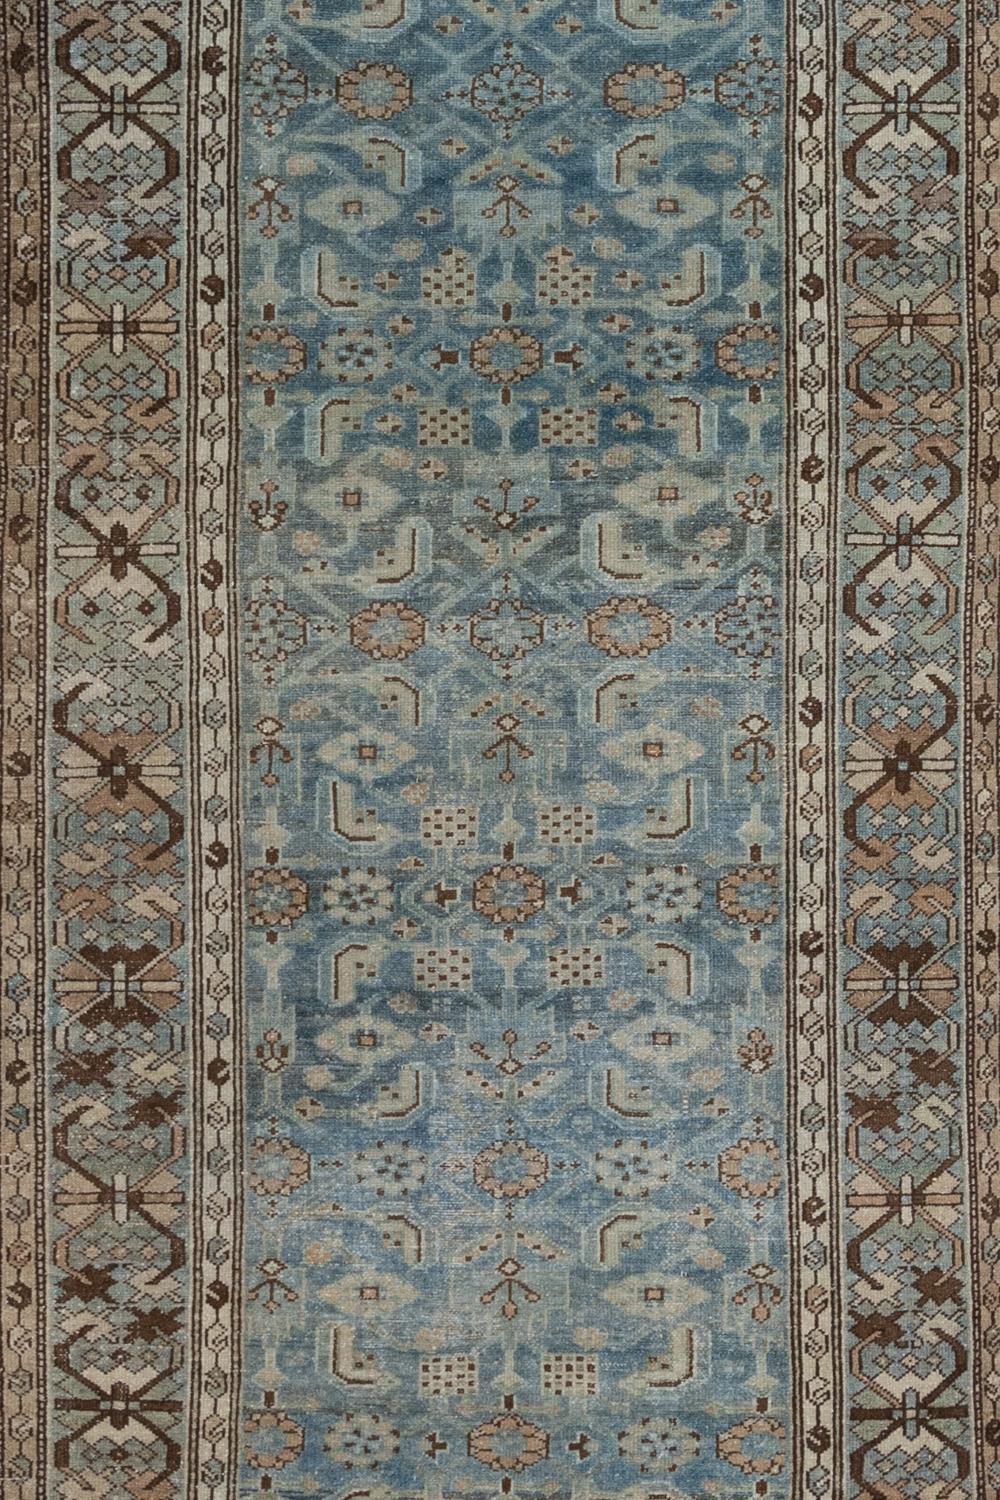 Age: Circa 1920

Colors: blue, brown, charcoal, green

Pile: medium-low

Material: Wool on cotton

Wear Notes: 2 

Wear Guide:

Vintage and antique rugs are by nature, pre-loved and may show evidence of their past. There are varying